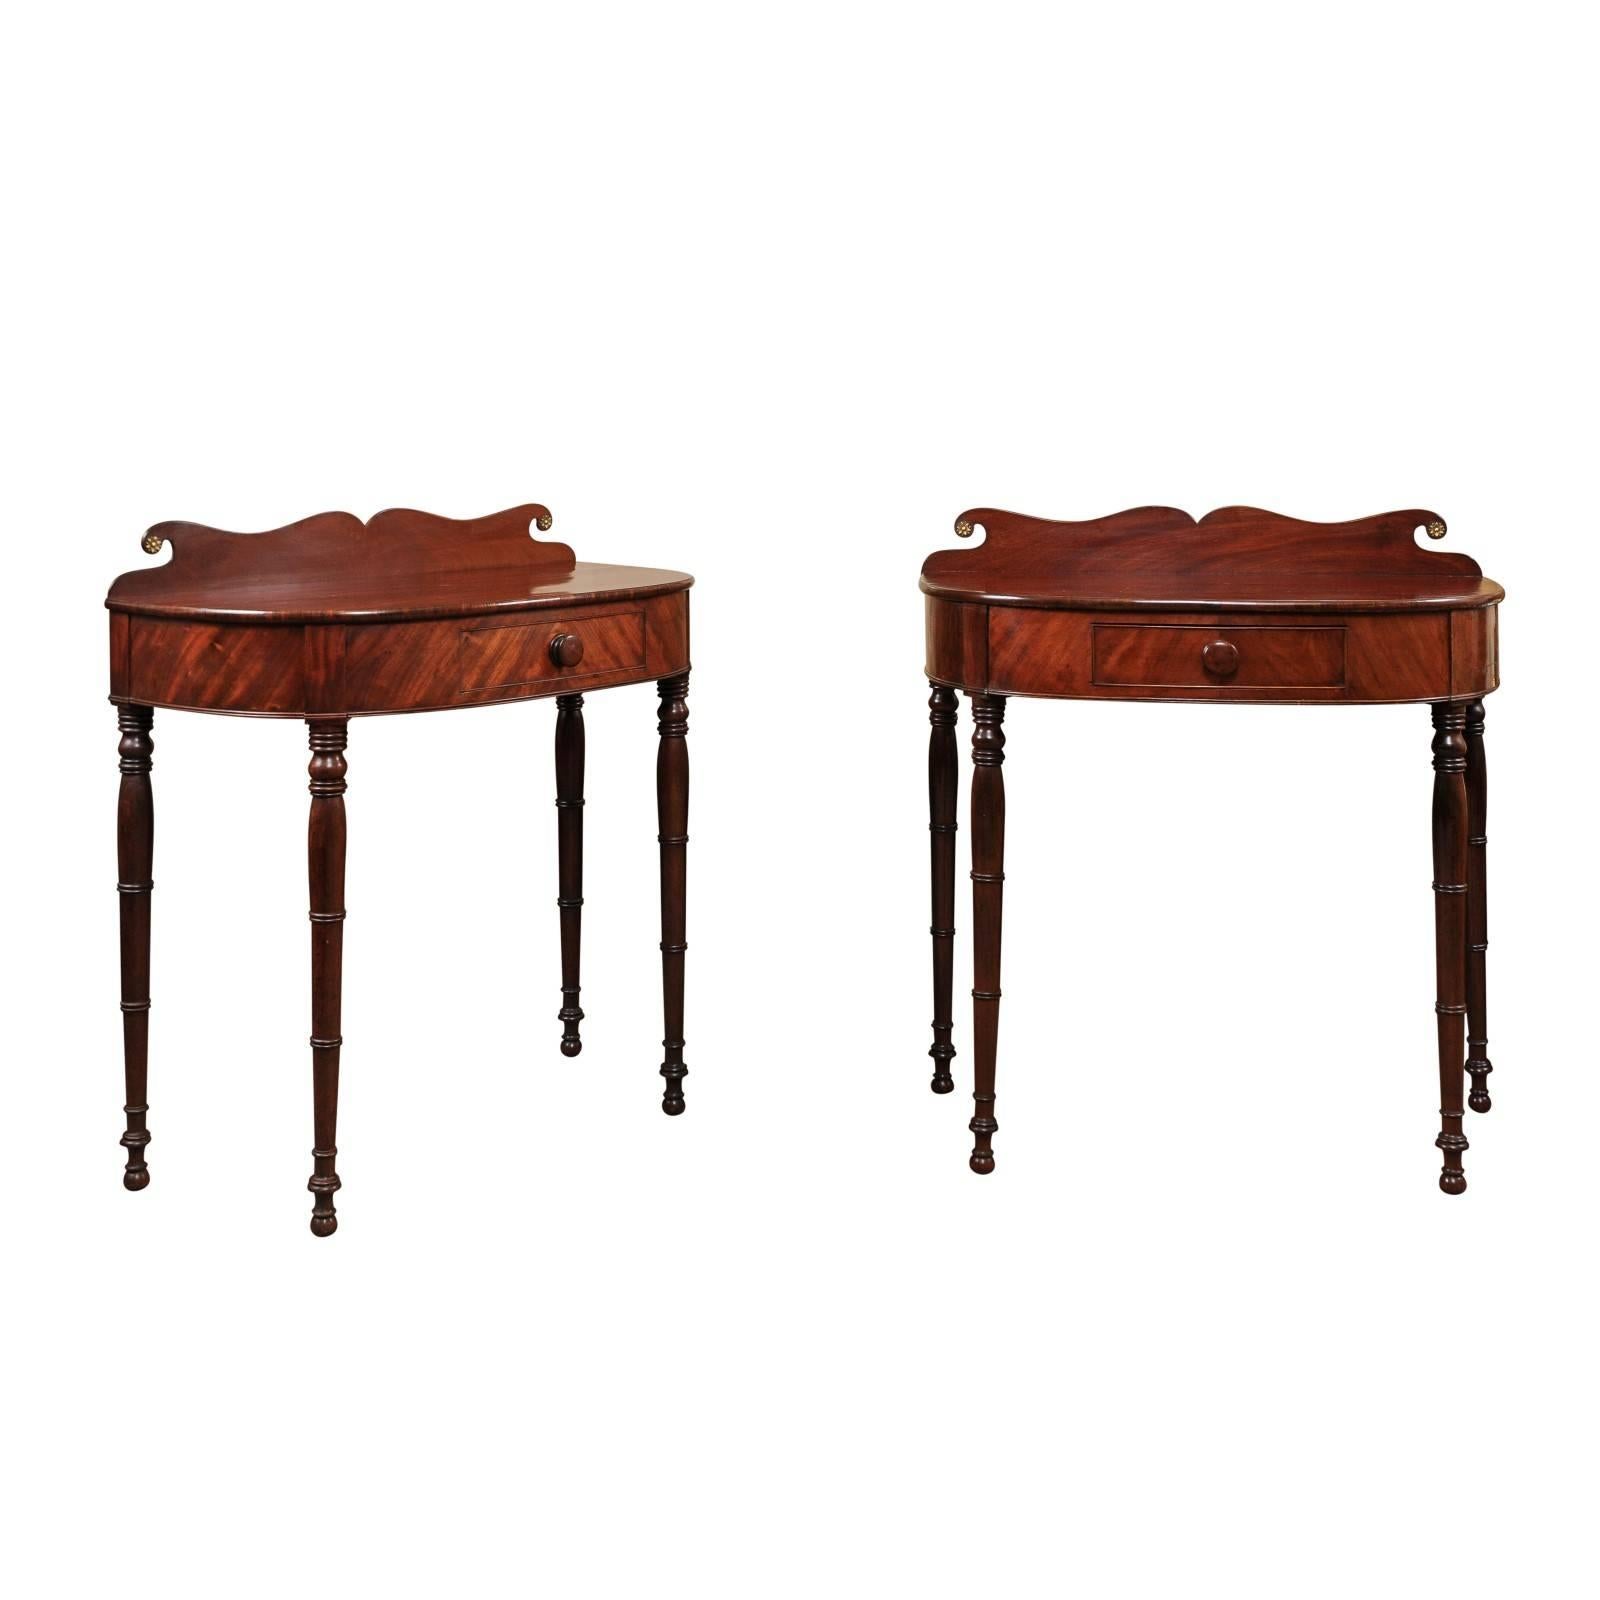 Pair of 19th Century Federal Style Mahogany Demilune Console Tables